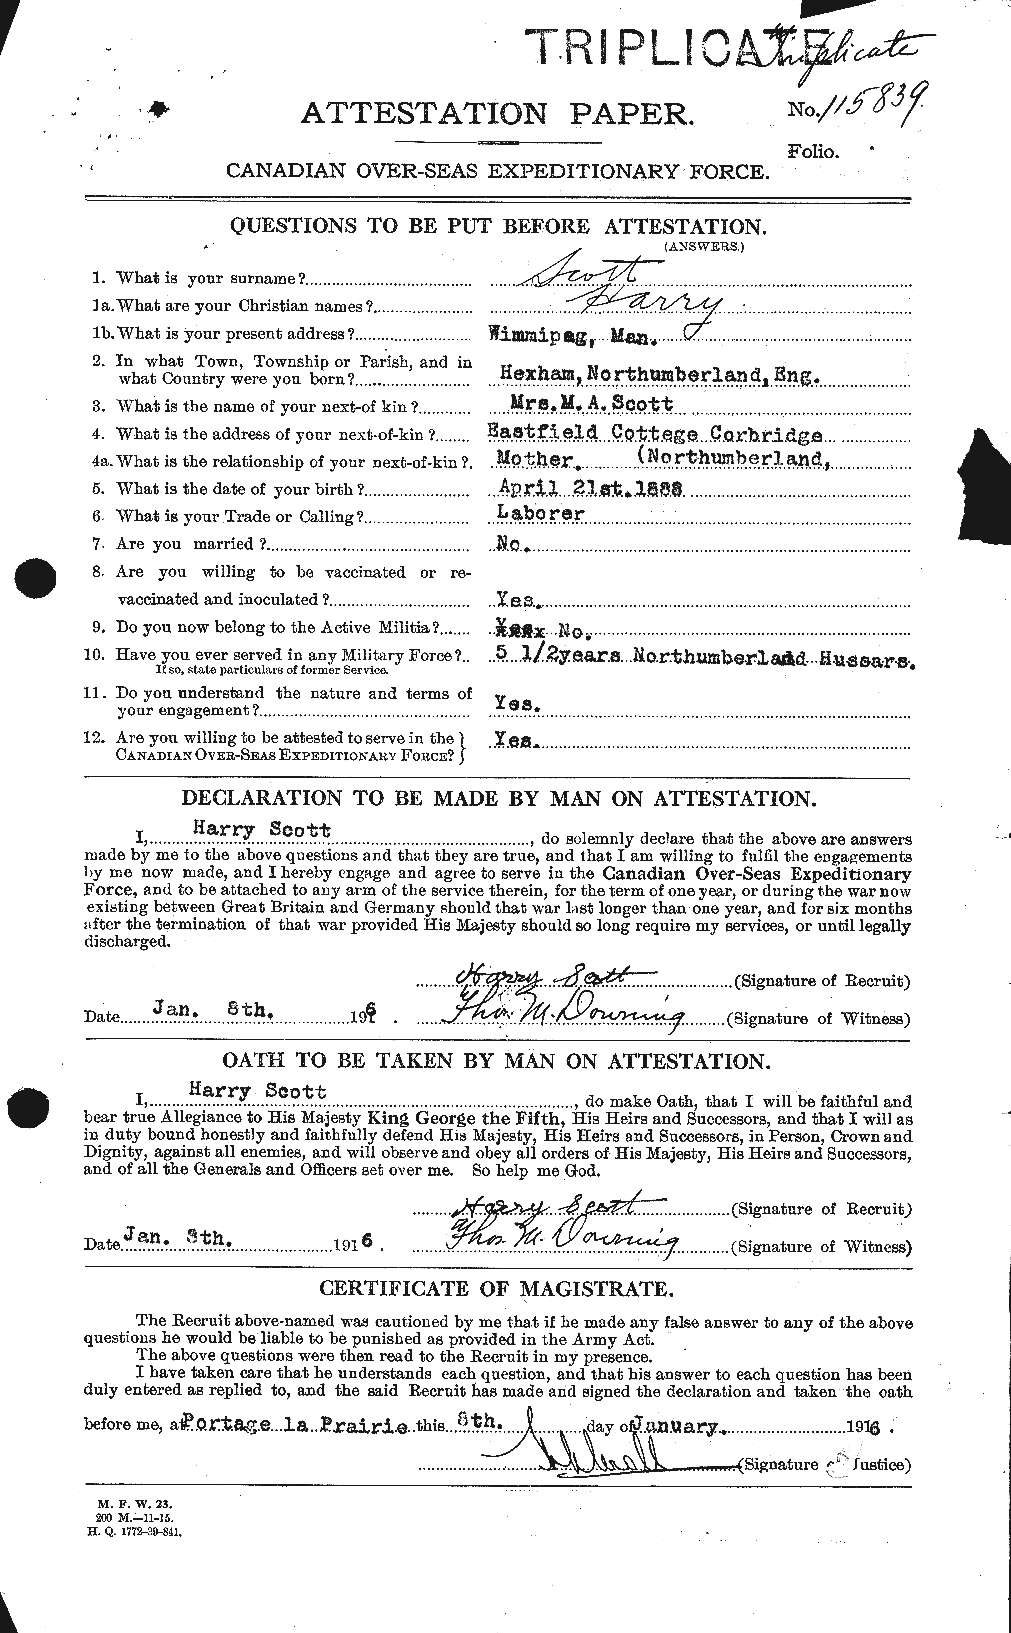 Personnel Records of the First World War - CEF 086323a